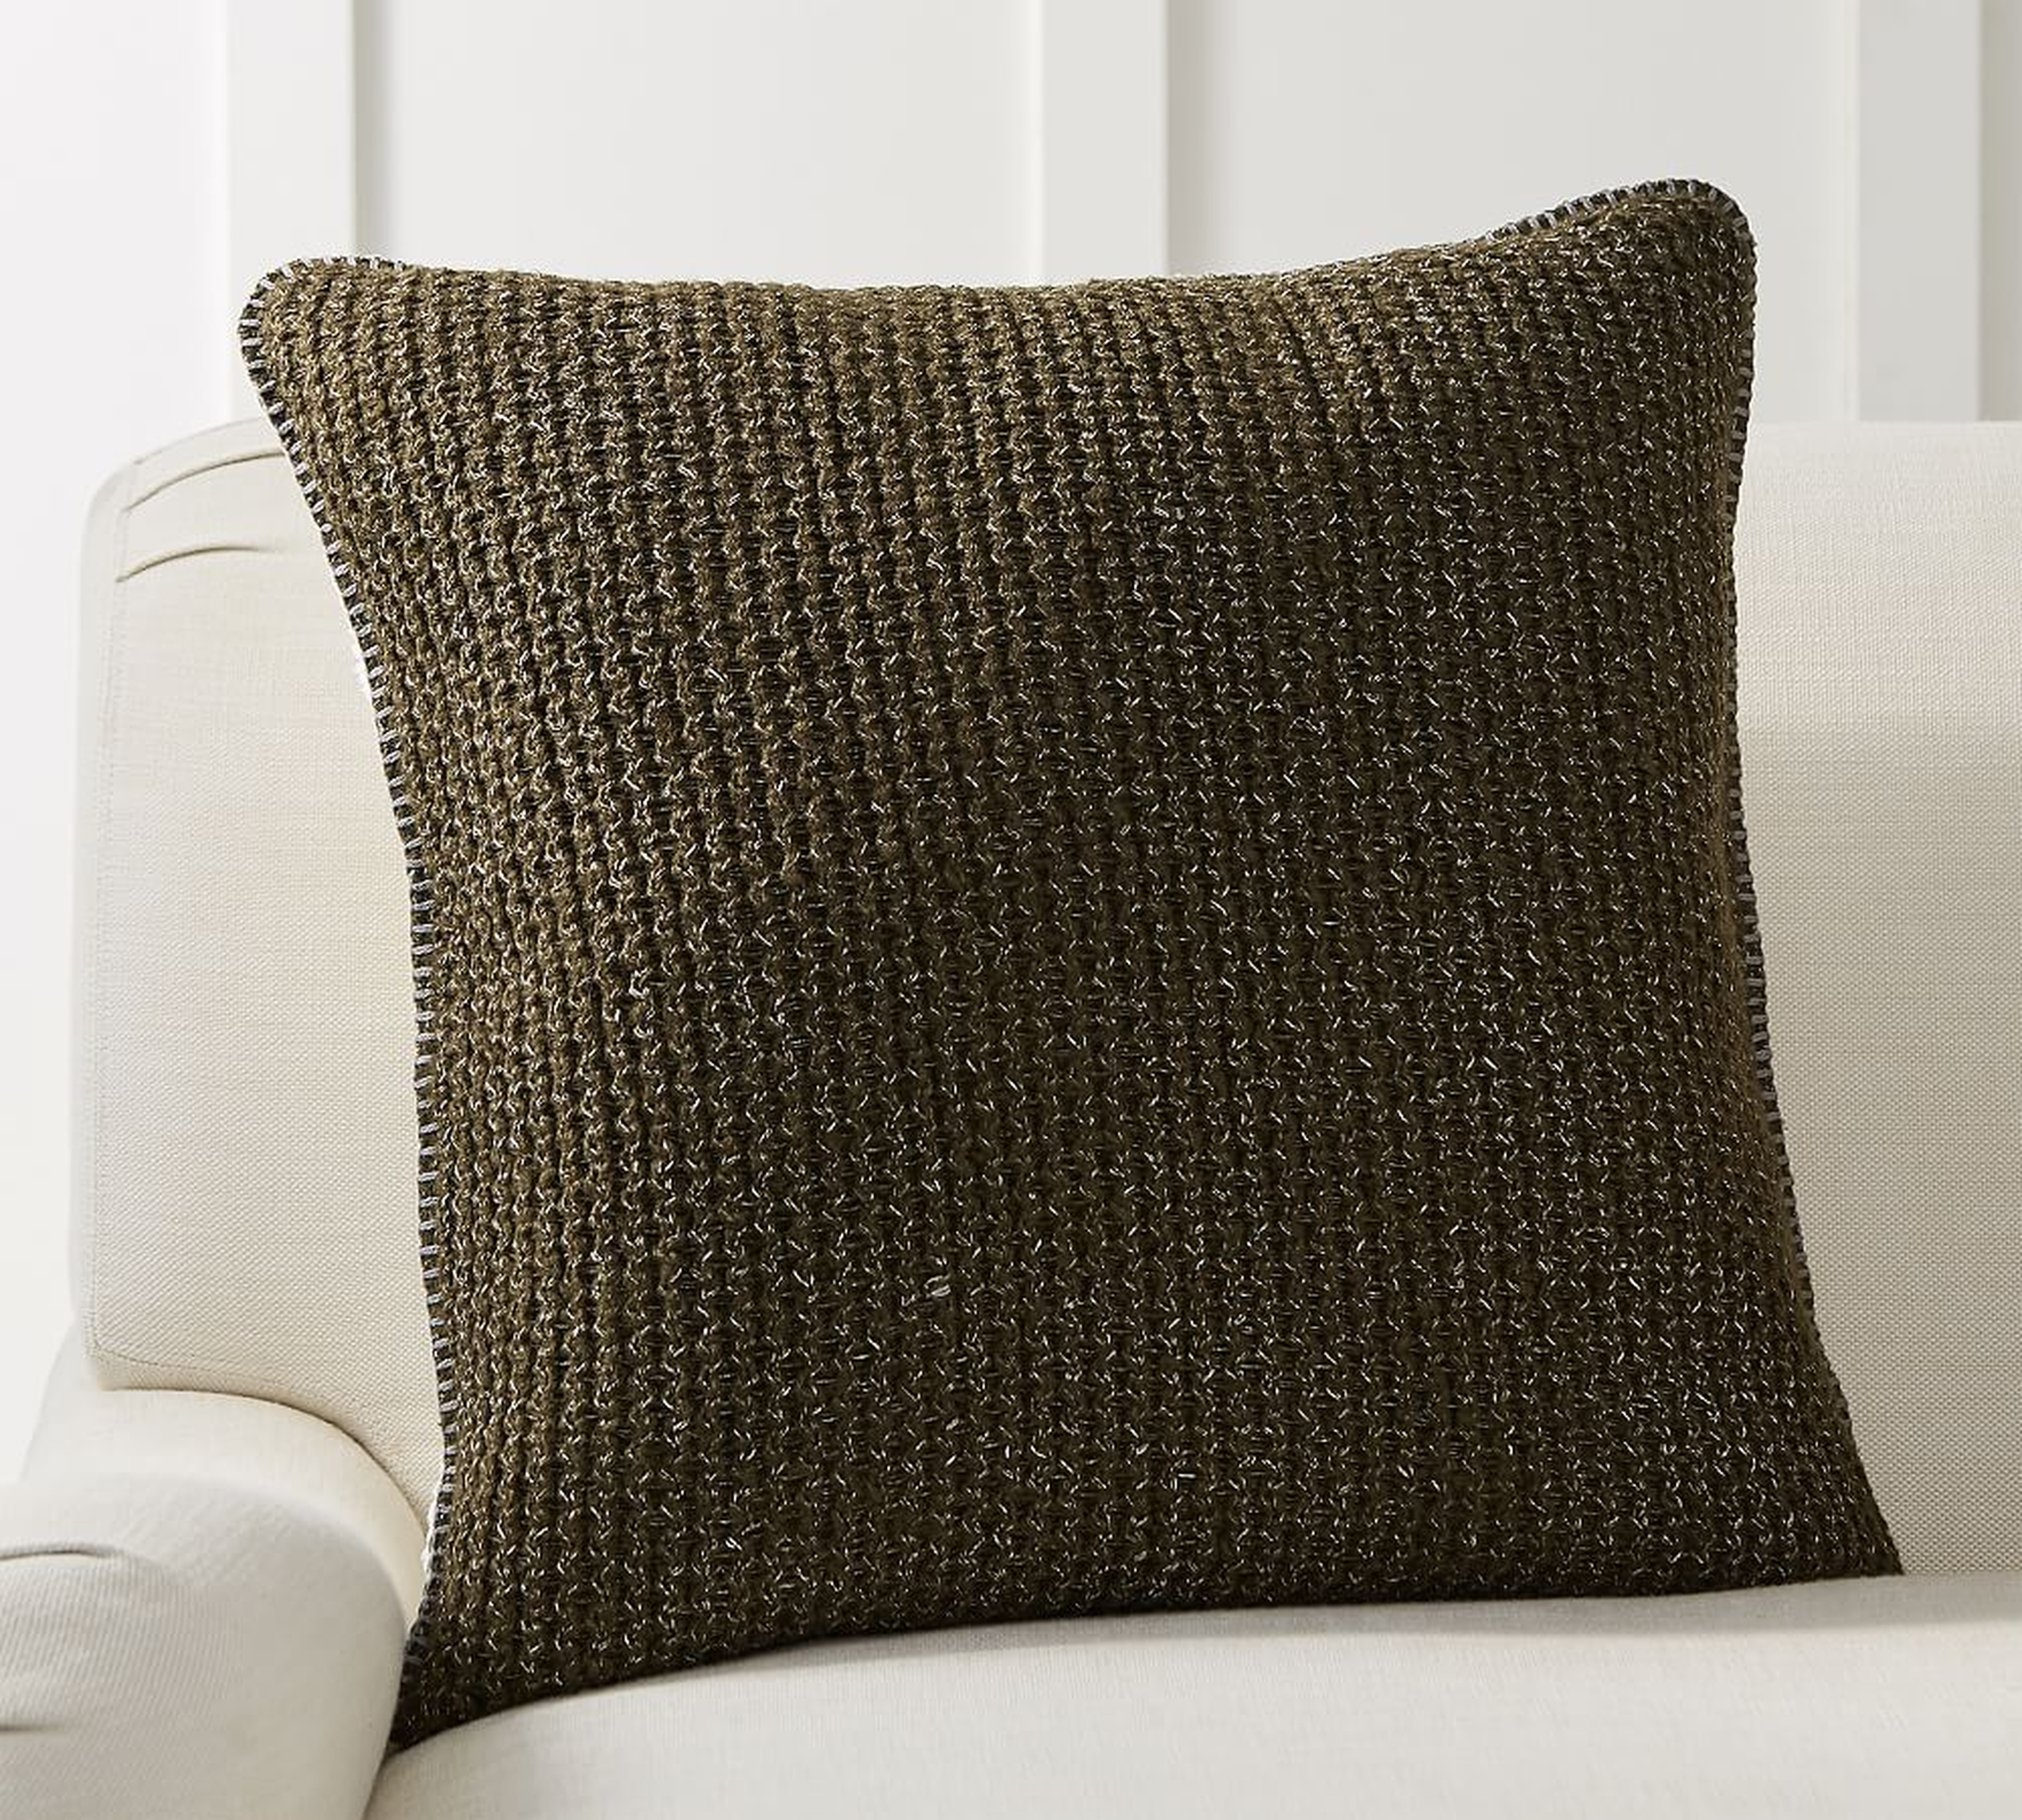 Thermal Knit Sherpa Back Pillow Cover, 24 x 24", Olive - Pottery Barn